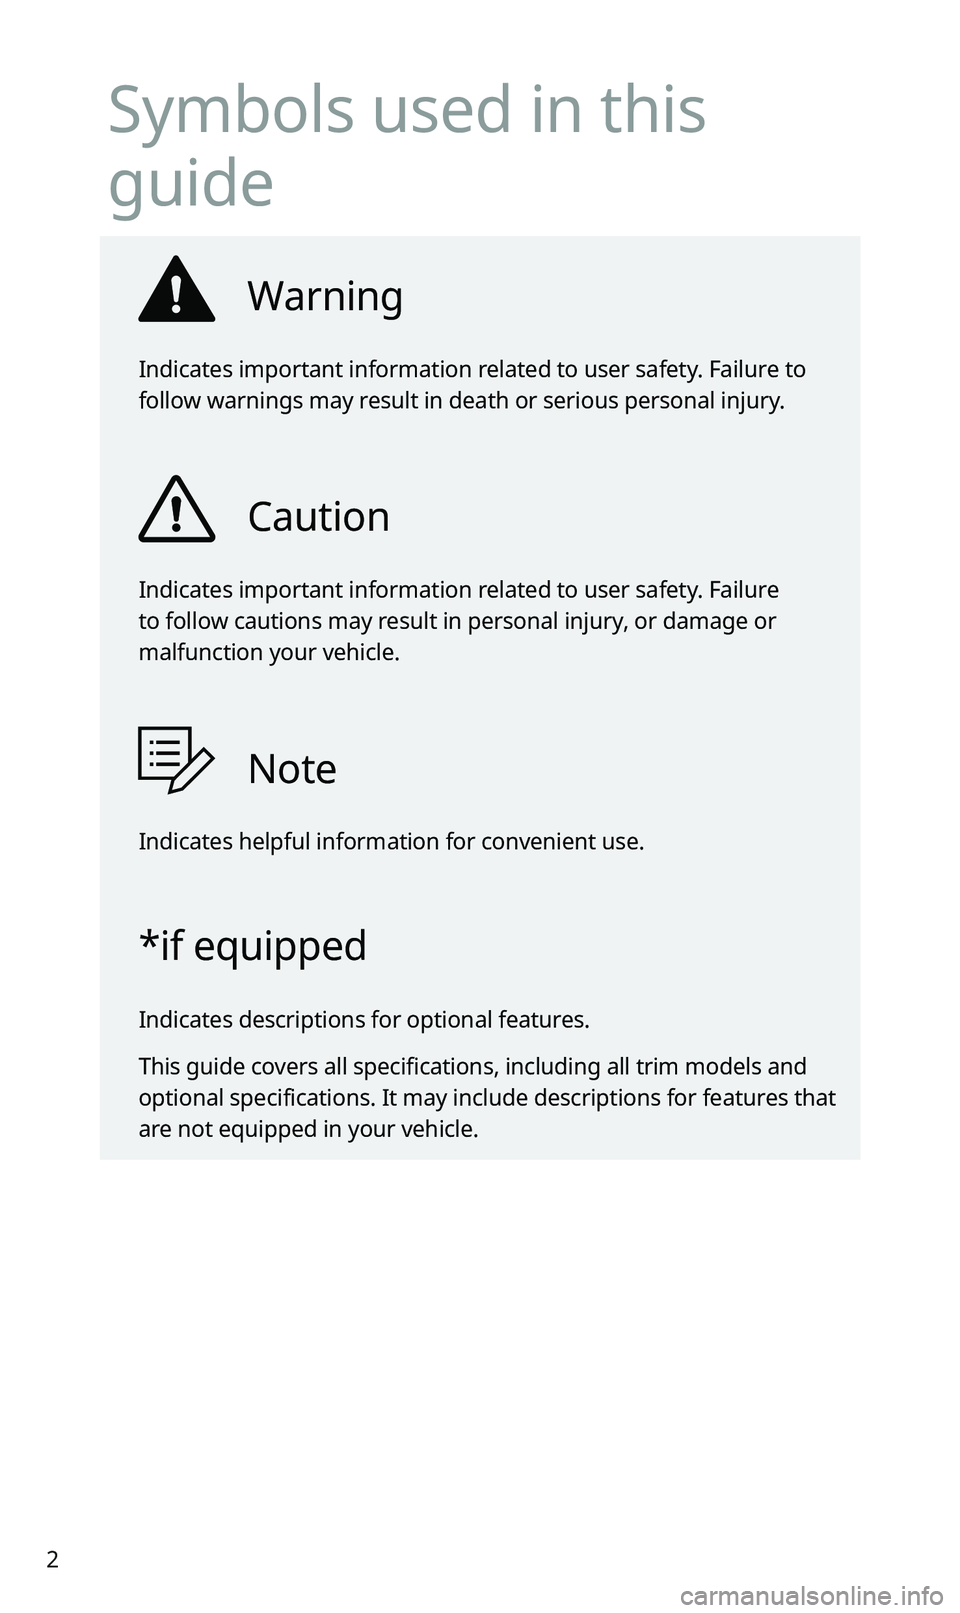 KIA SPORTAGE 2020  Quick Reference Guide 2
Symbols used in this 
guide
Warning
Indicates important information related to user safety. Failure to 
follow warnings may result in death or serious personal injury.
Caution
Indicates important in